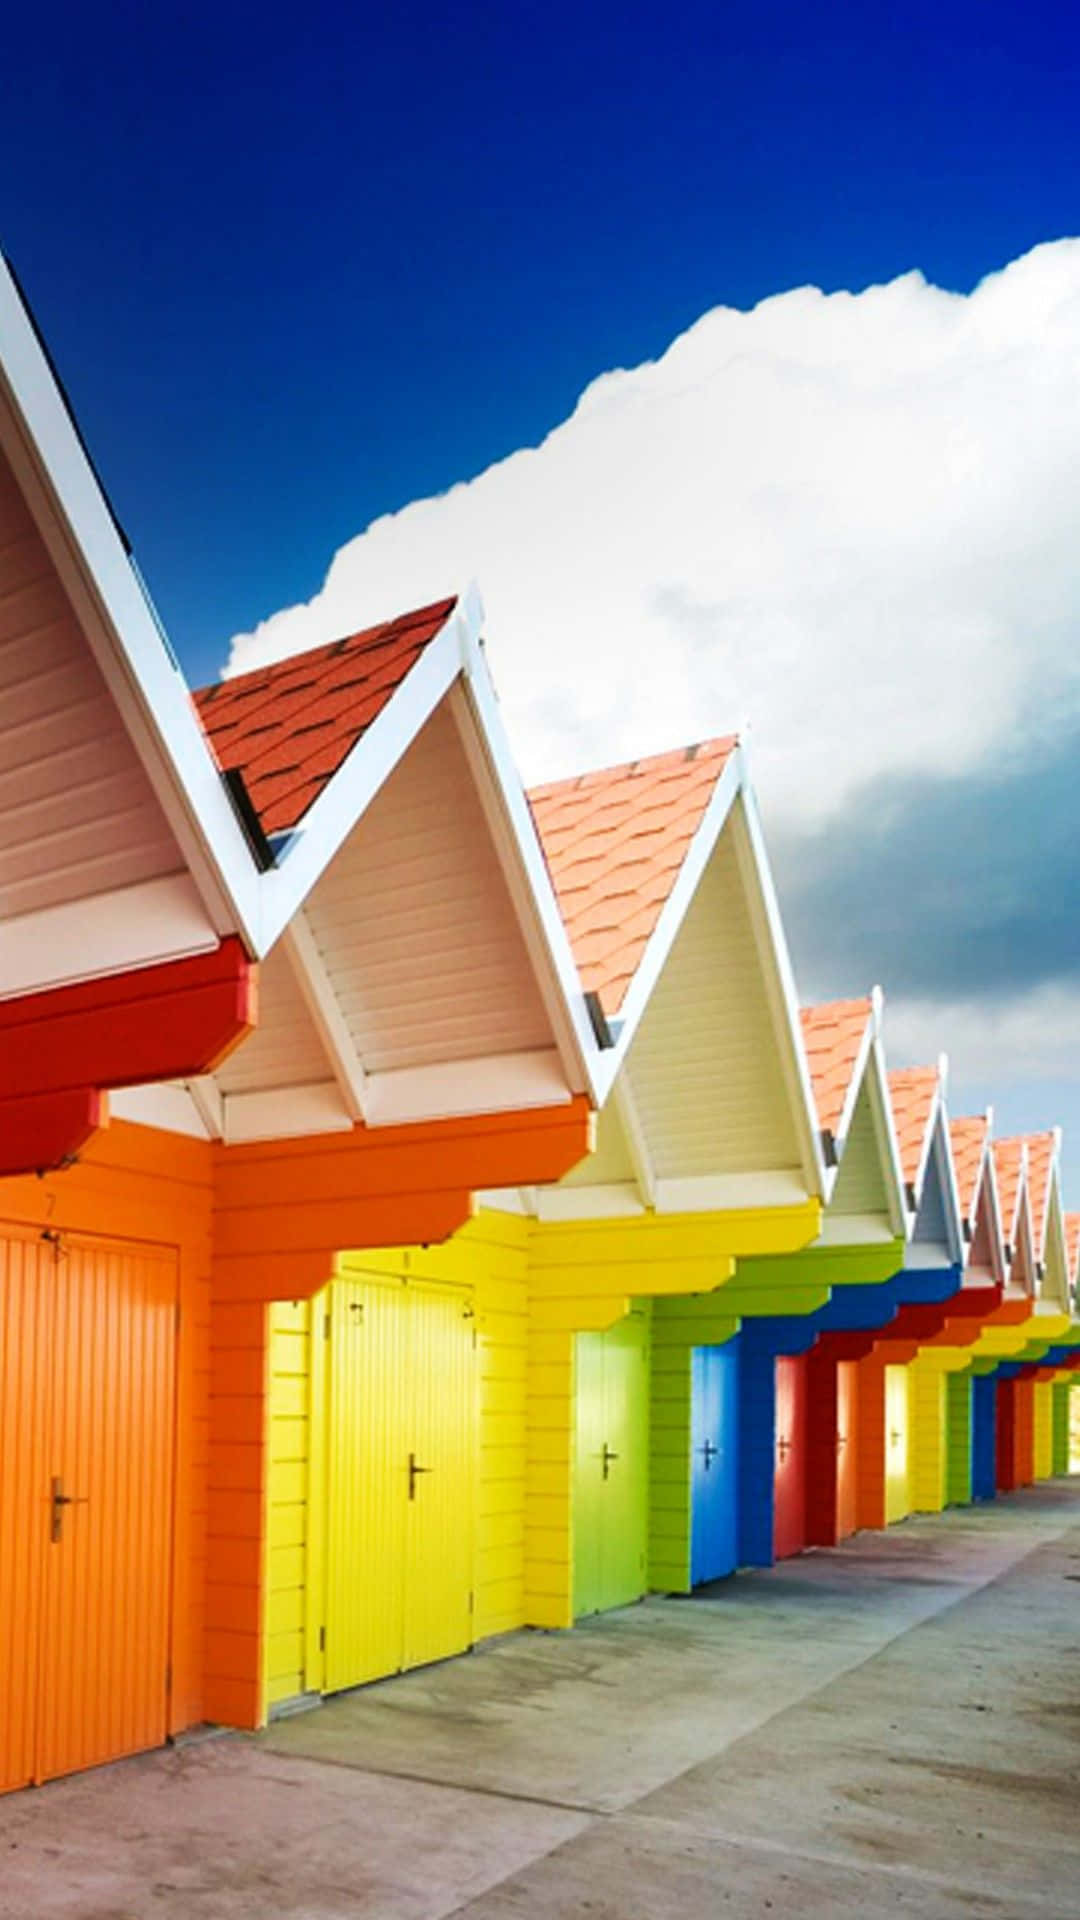 Vibrant and Colorful Beach Huts Wallpaper